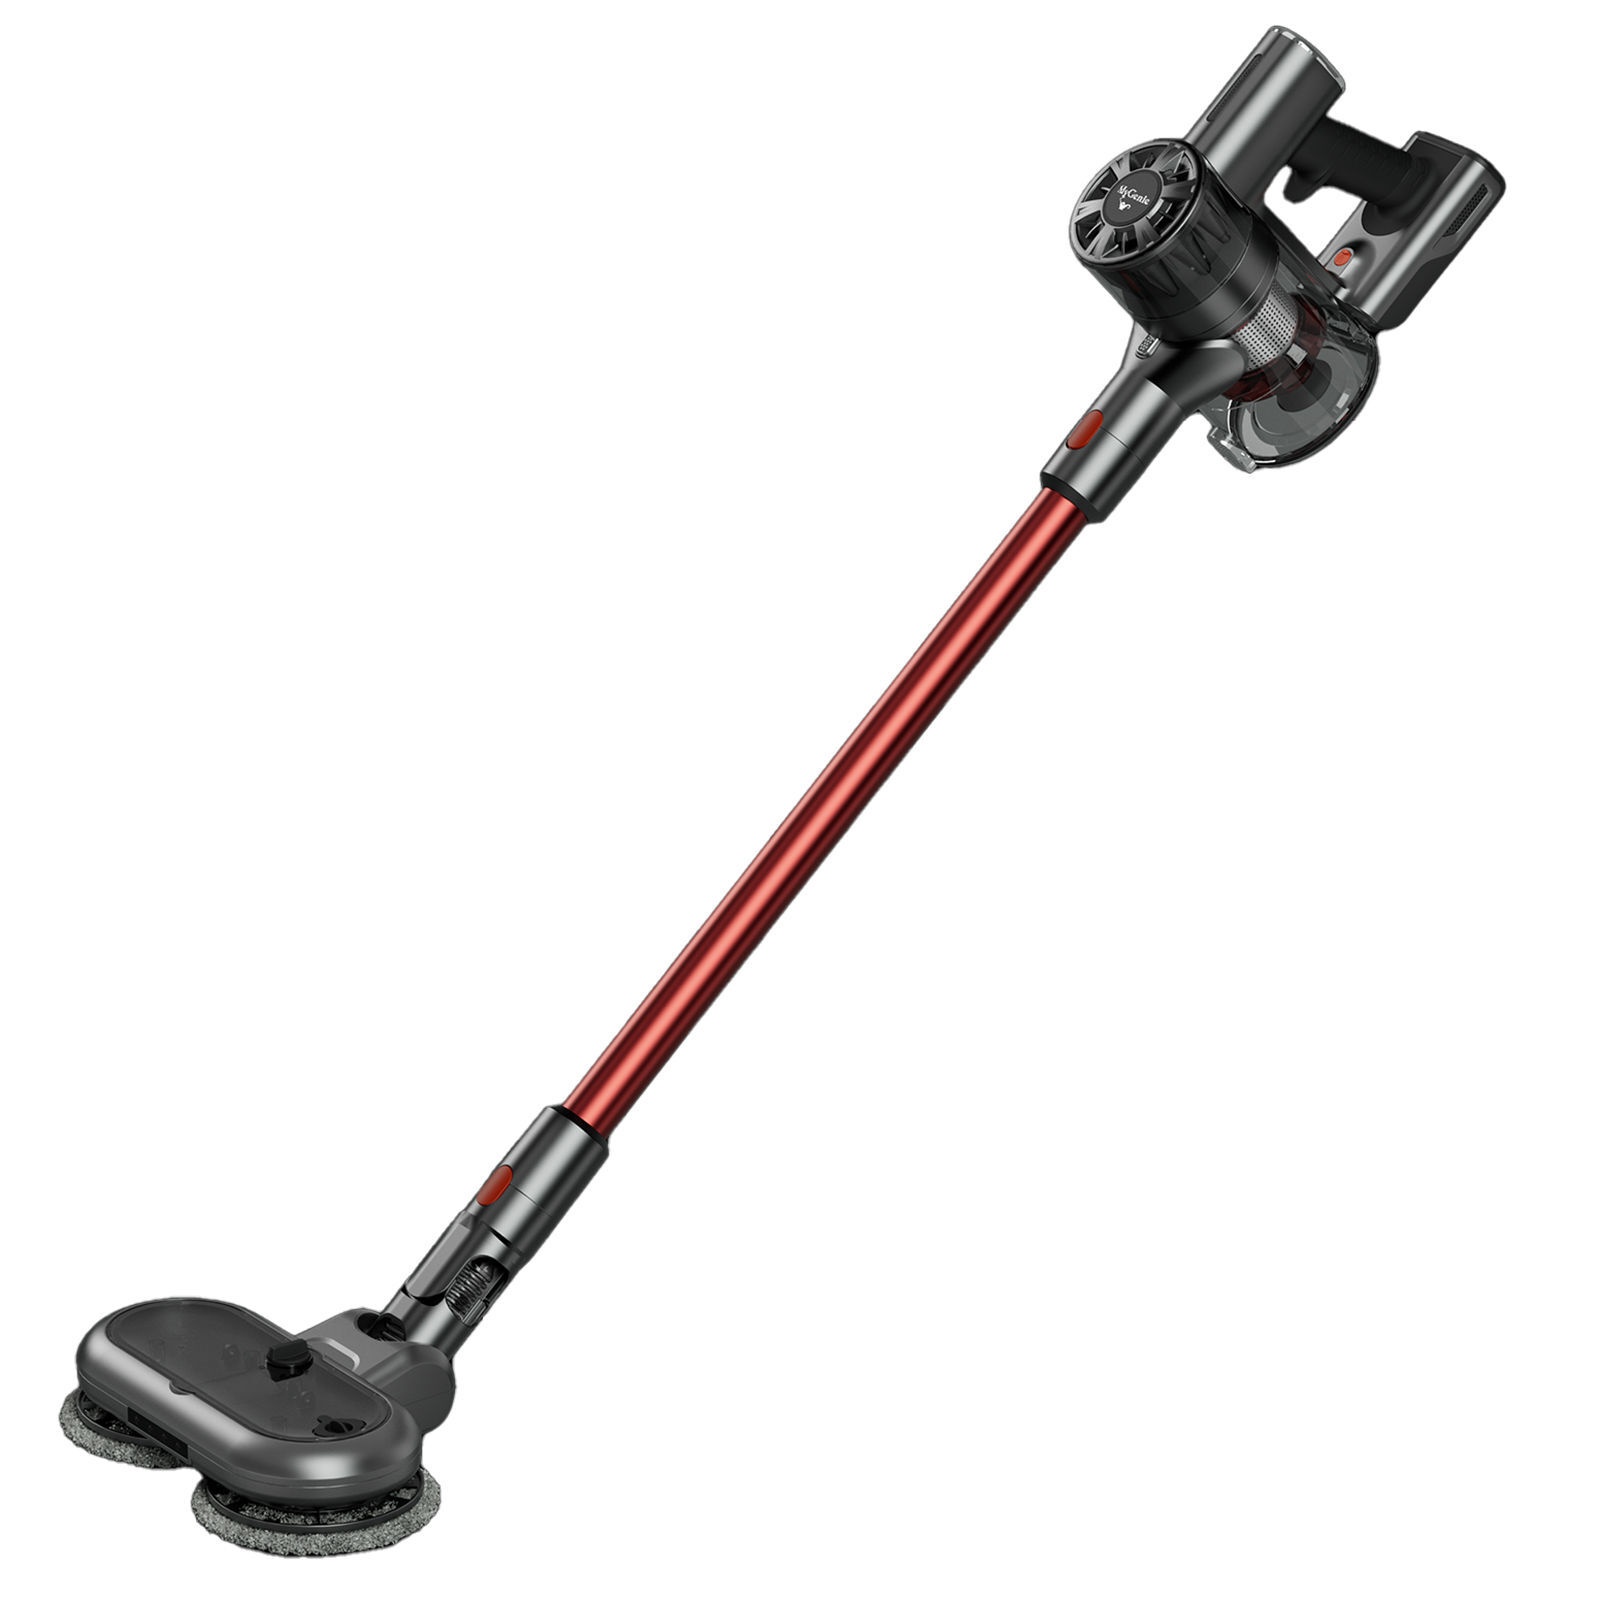 X9 Twin Spin Turbo Mop Vacuum Cleaner Floor Mopping Cordless – Red